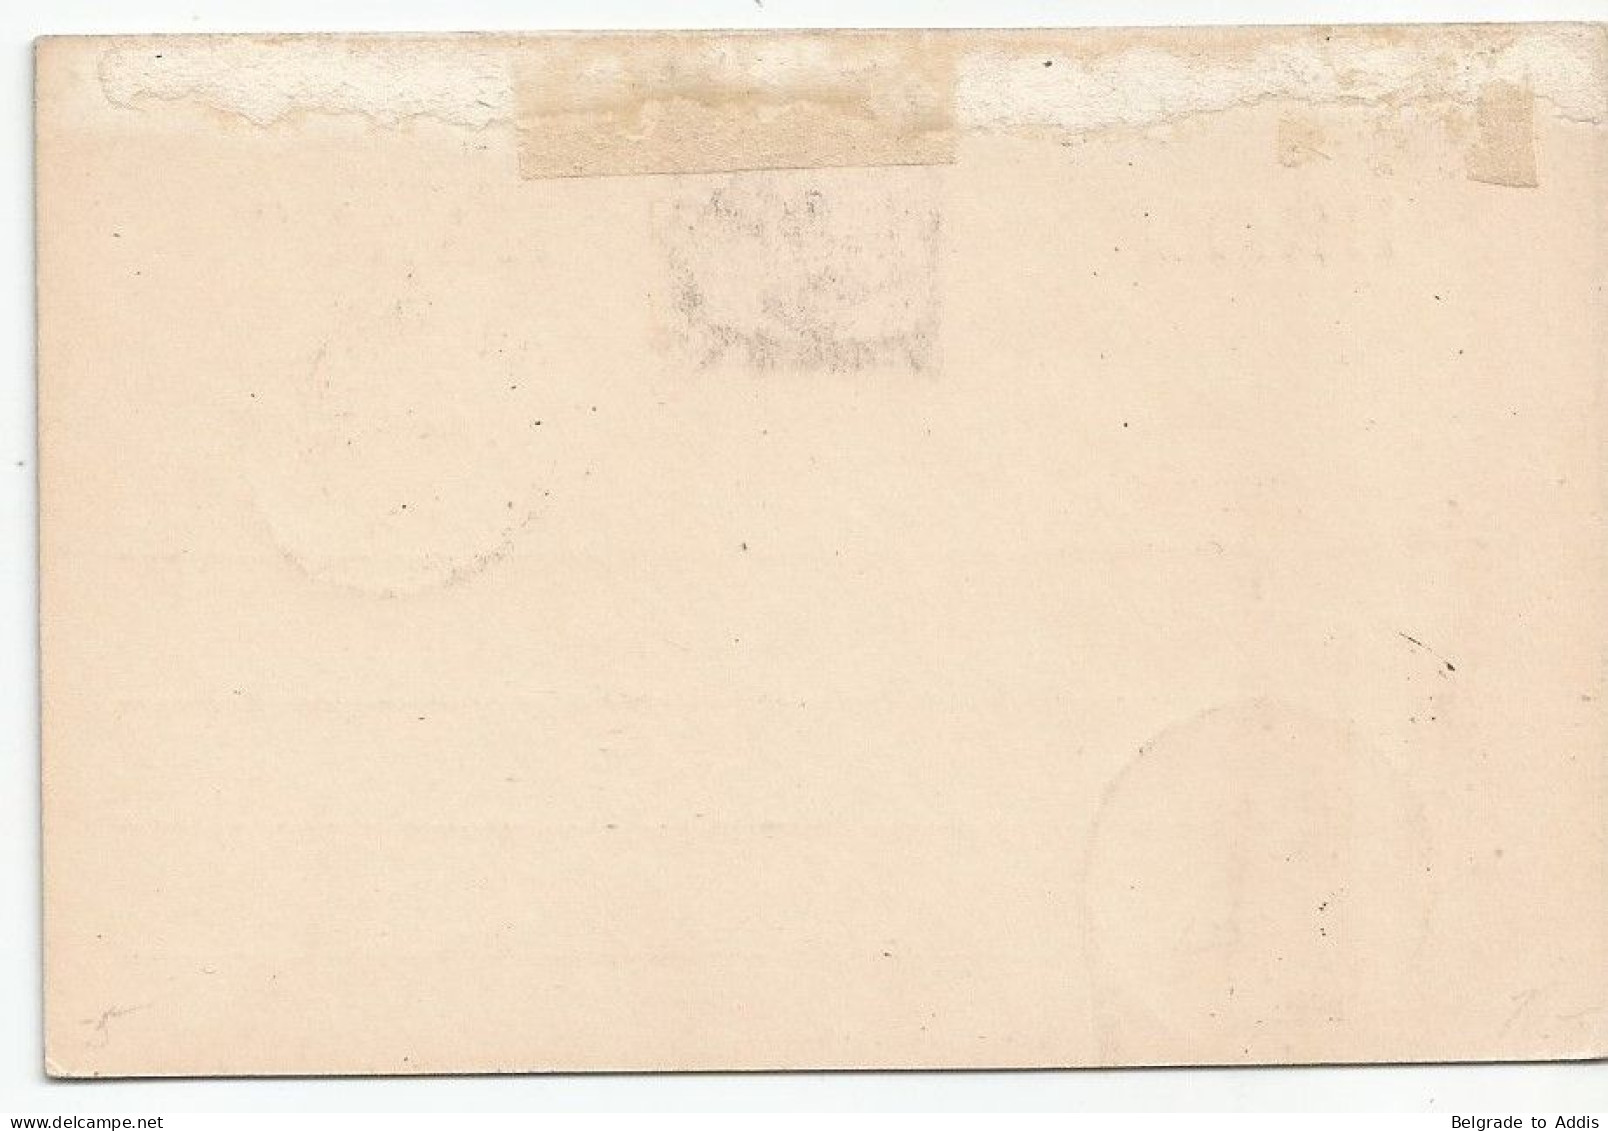 South Africa Great Britain ORC OFS Orange River Colony / Free State PostCard Postal Stationery 1892 Sent To Germany - Stato Libero Dell'Orange (1868-1909)